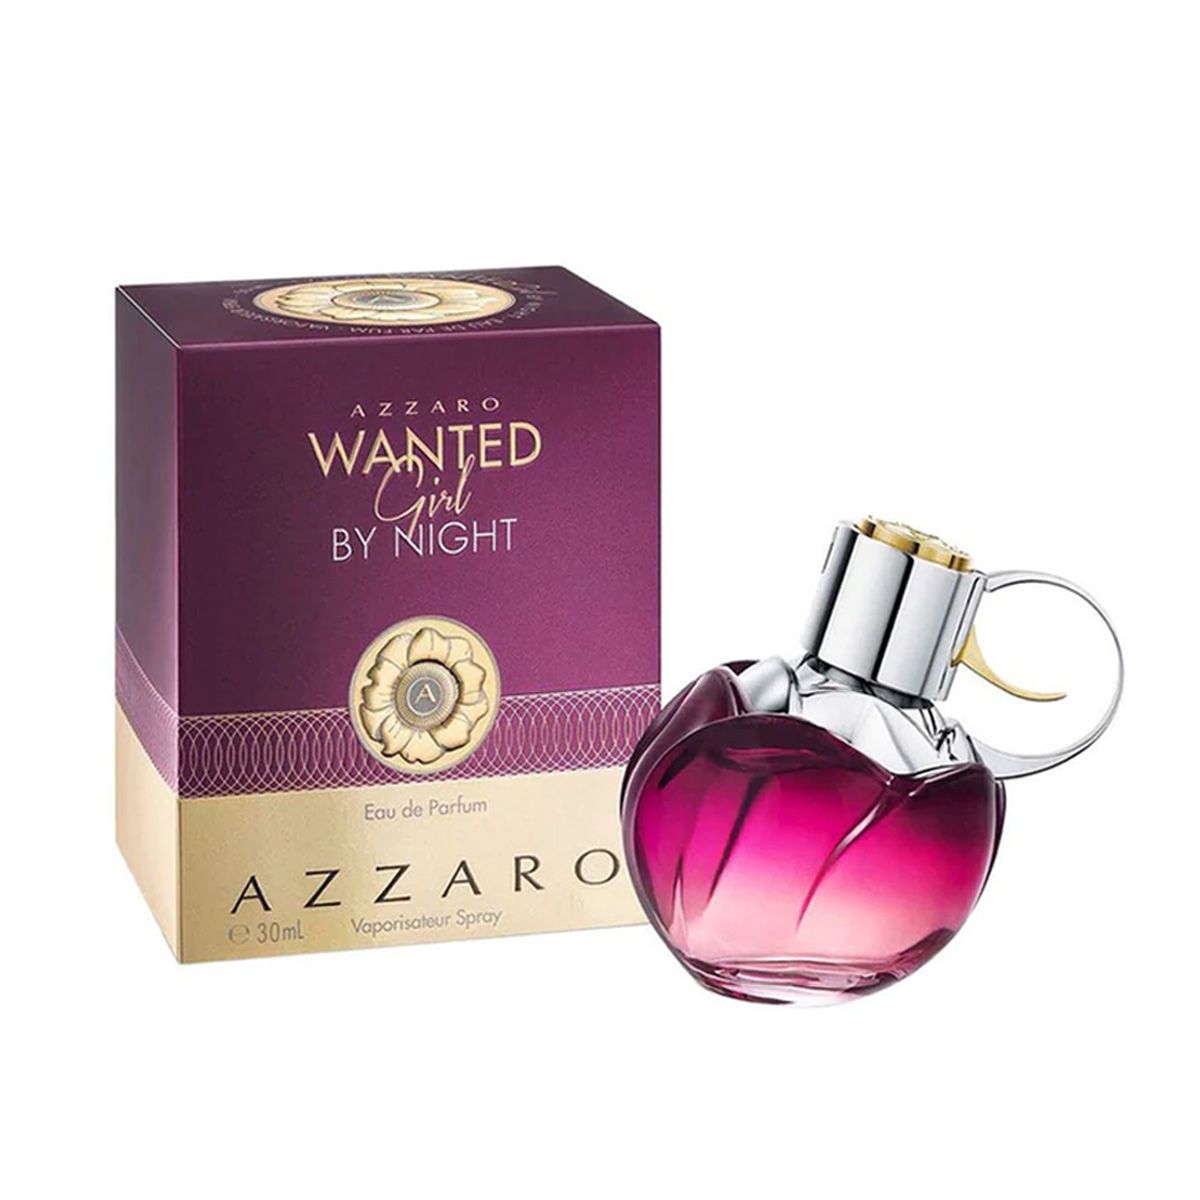  Azzaro Wanted Girl By Night 